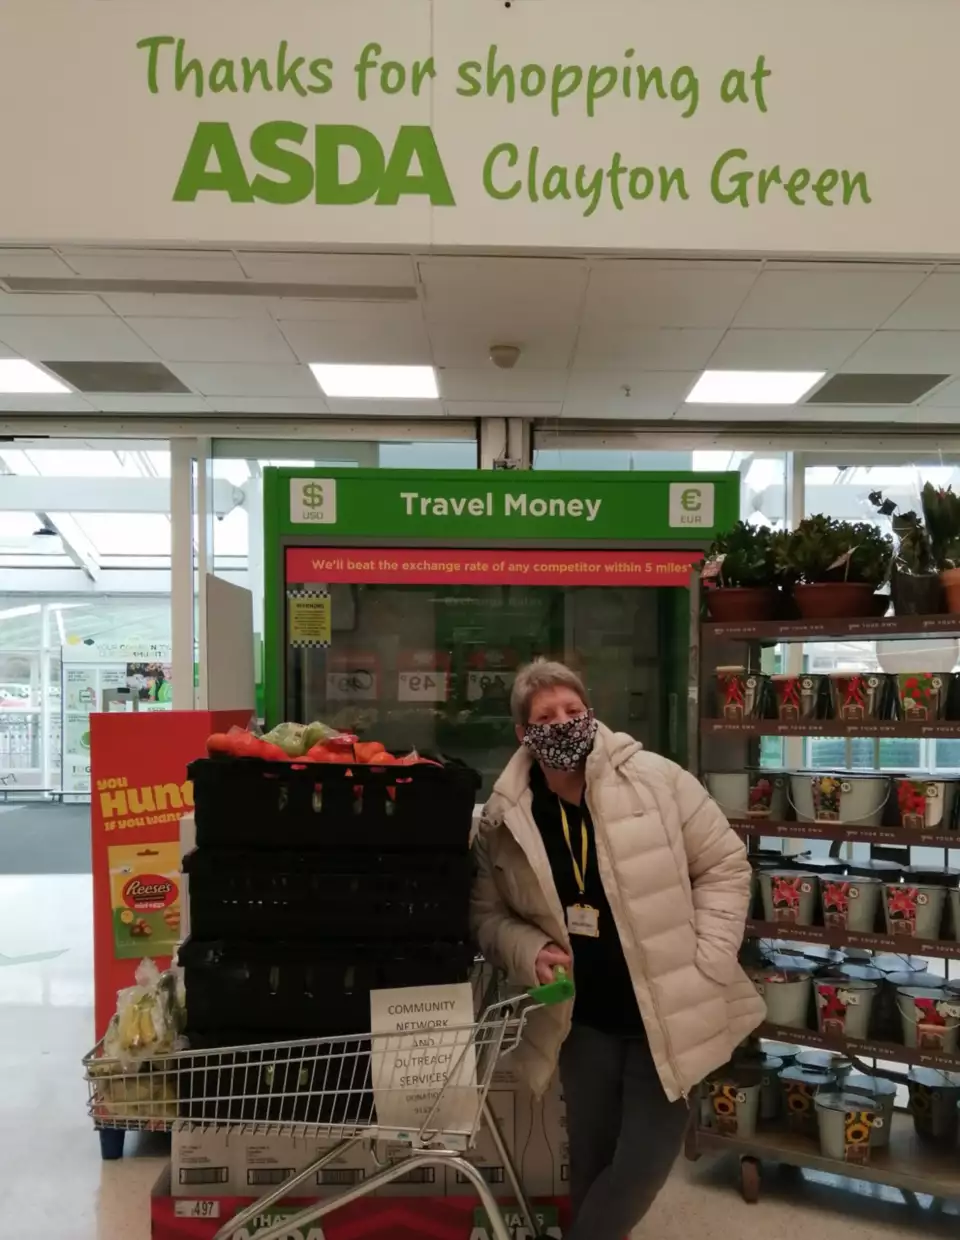 Fresh fruit for kids lunch parcels donatated to community network and outreach services Leyland,  | Asda Clayton Green